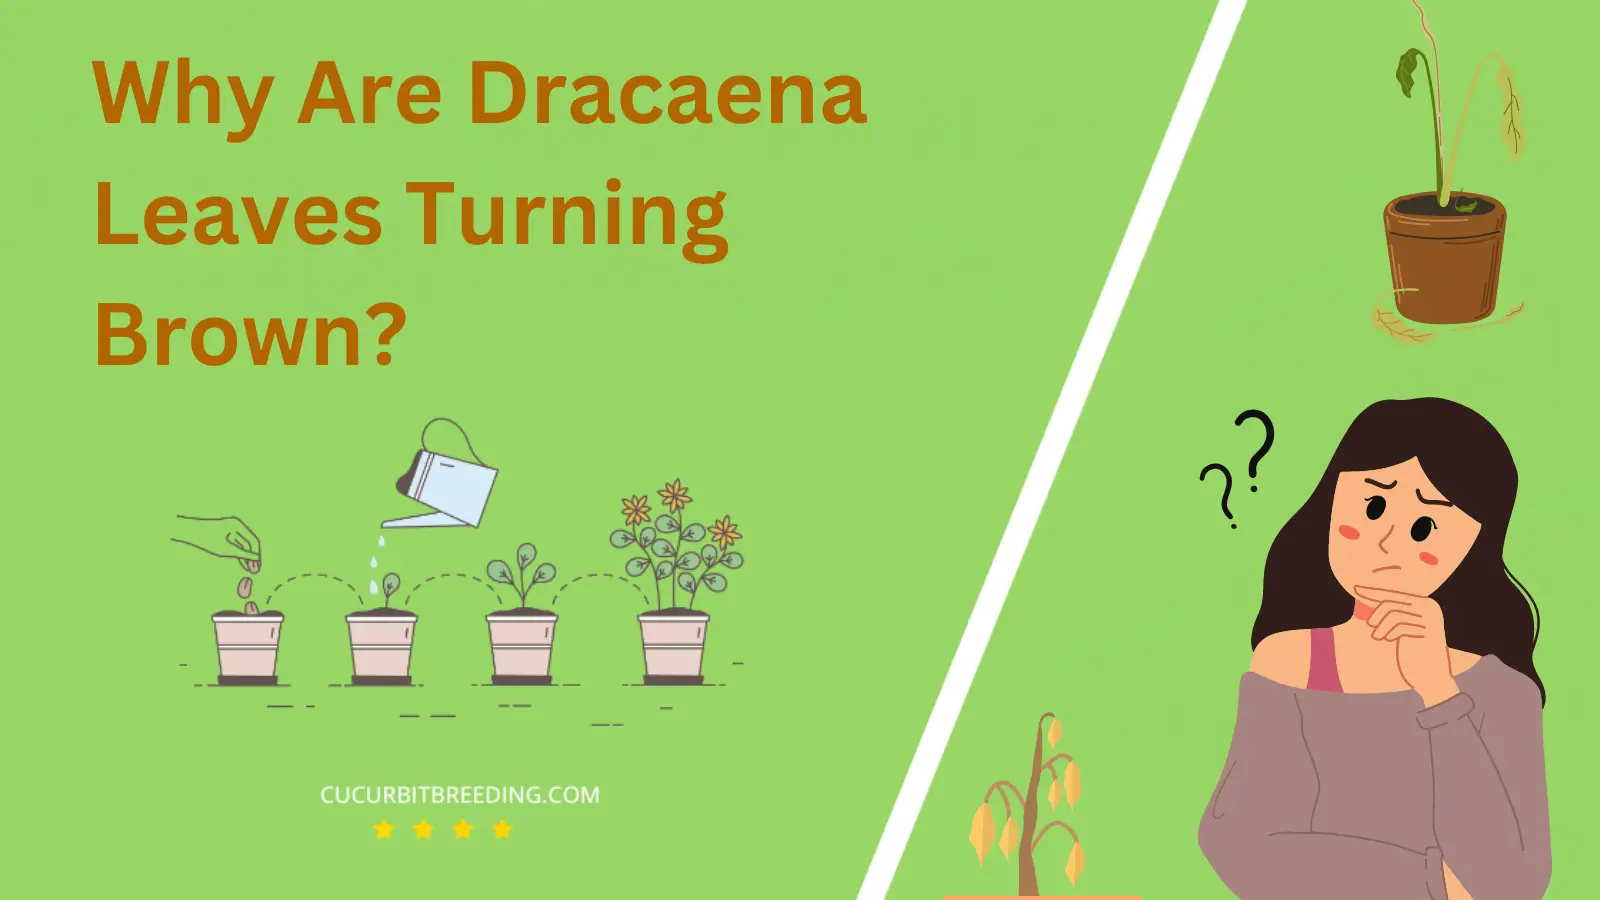 Why Are Dracaena Leaves Turning Brown